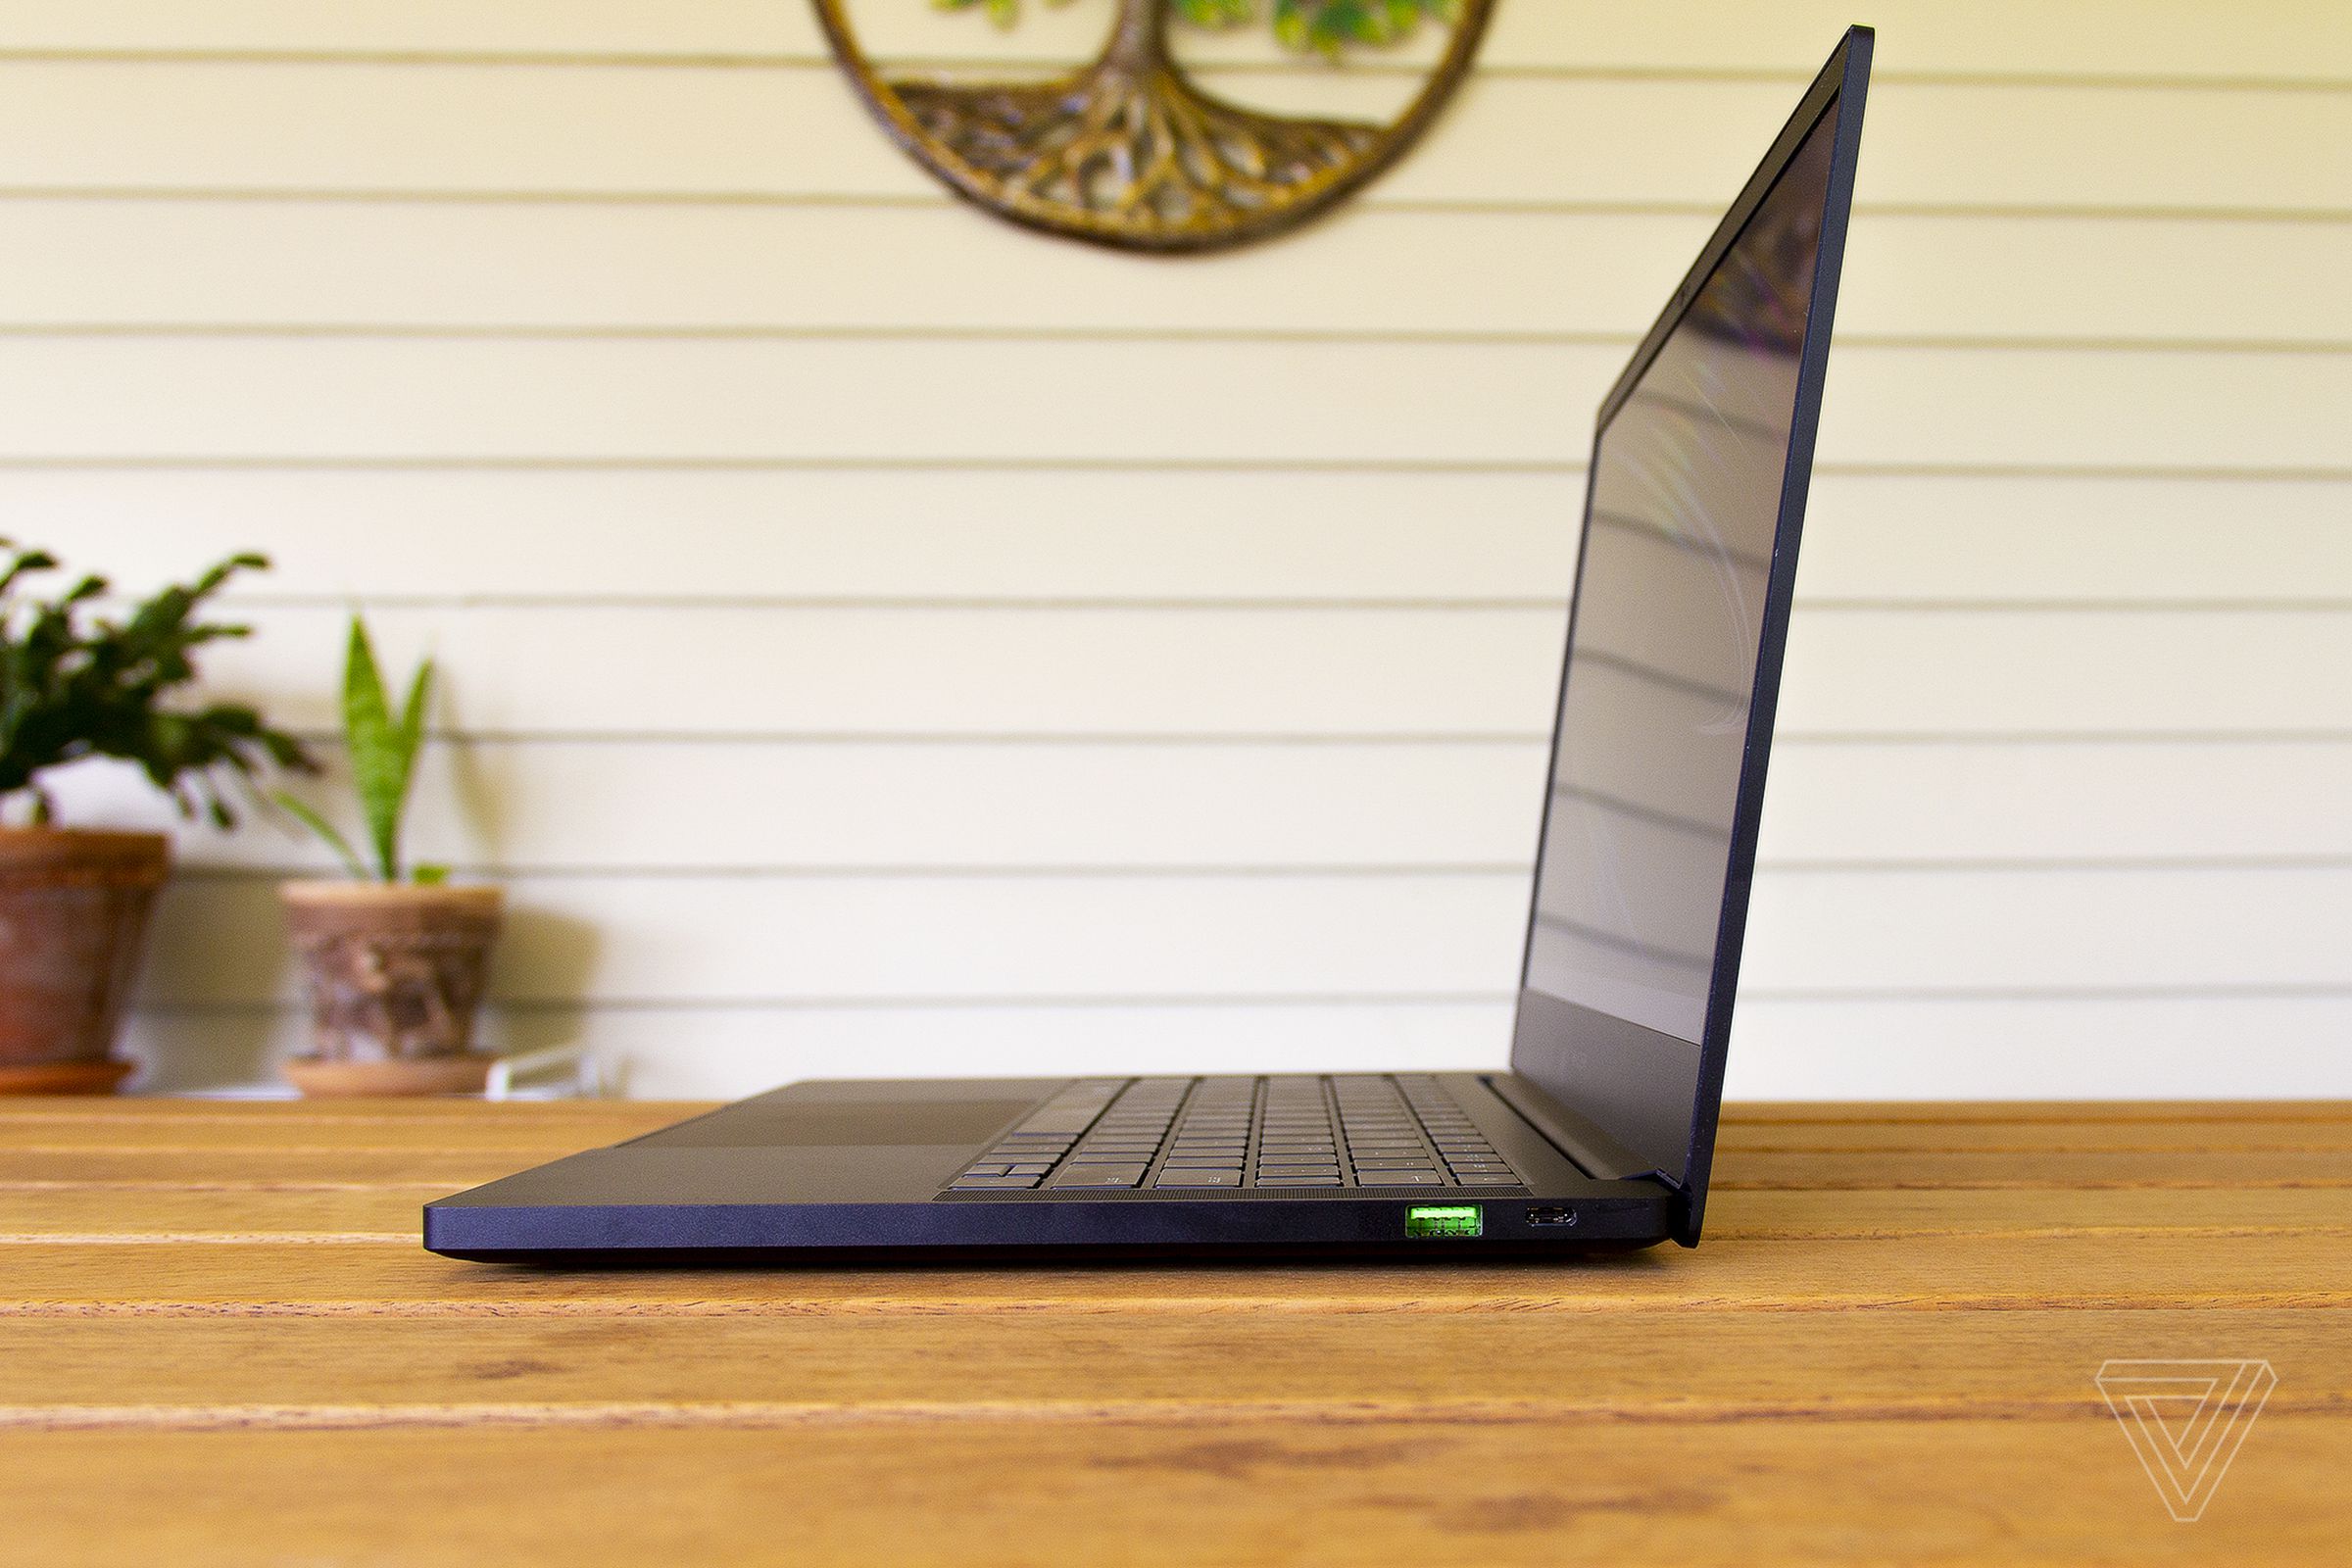 The Razer Blade Stealth 13 from the side.